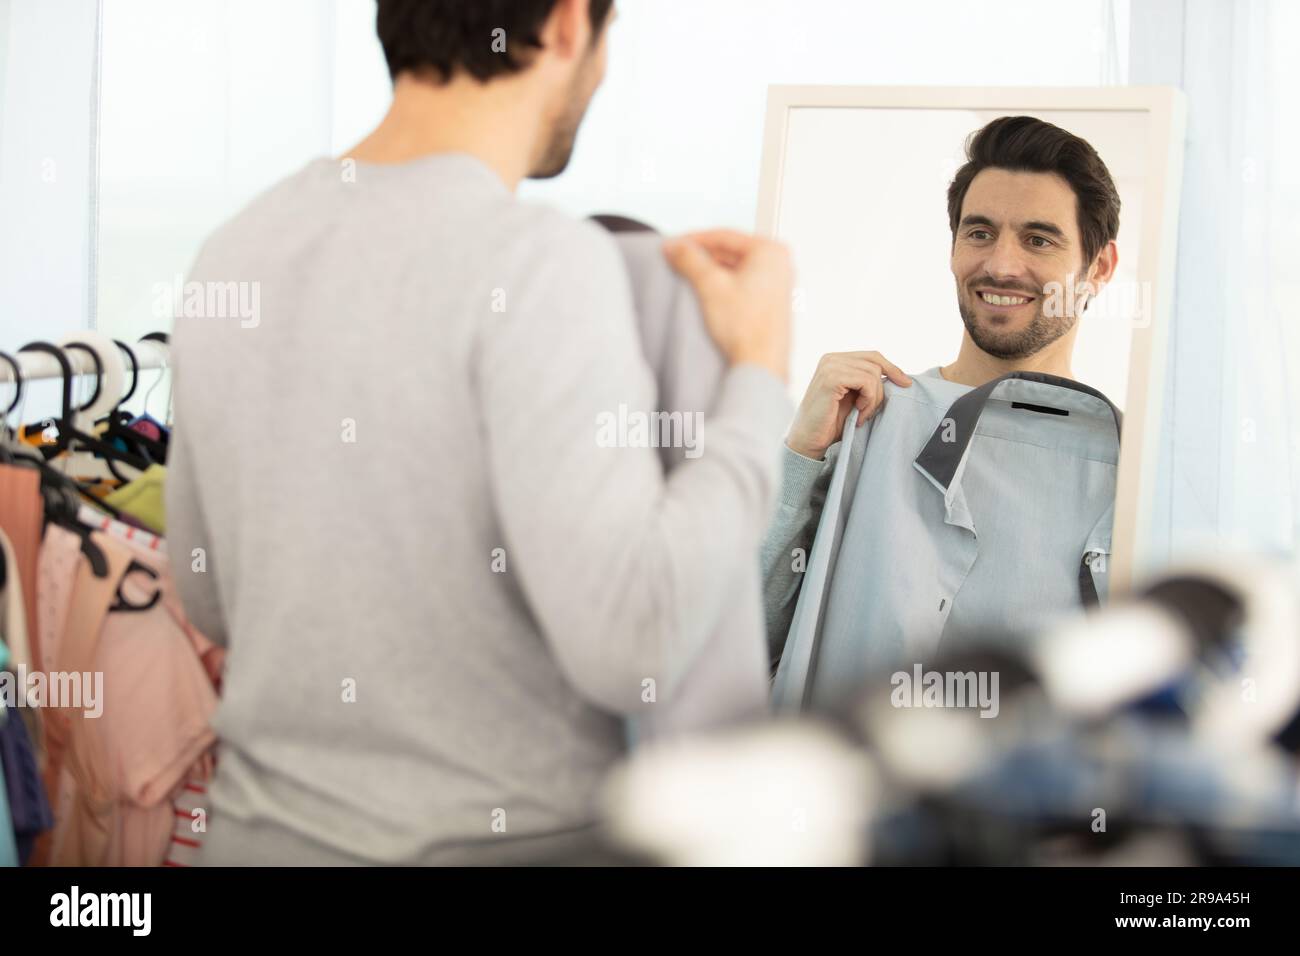 man in new outfit looking at himself in mirror indoor Stock Photo